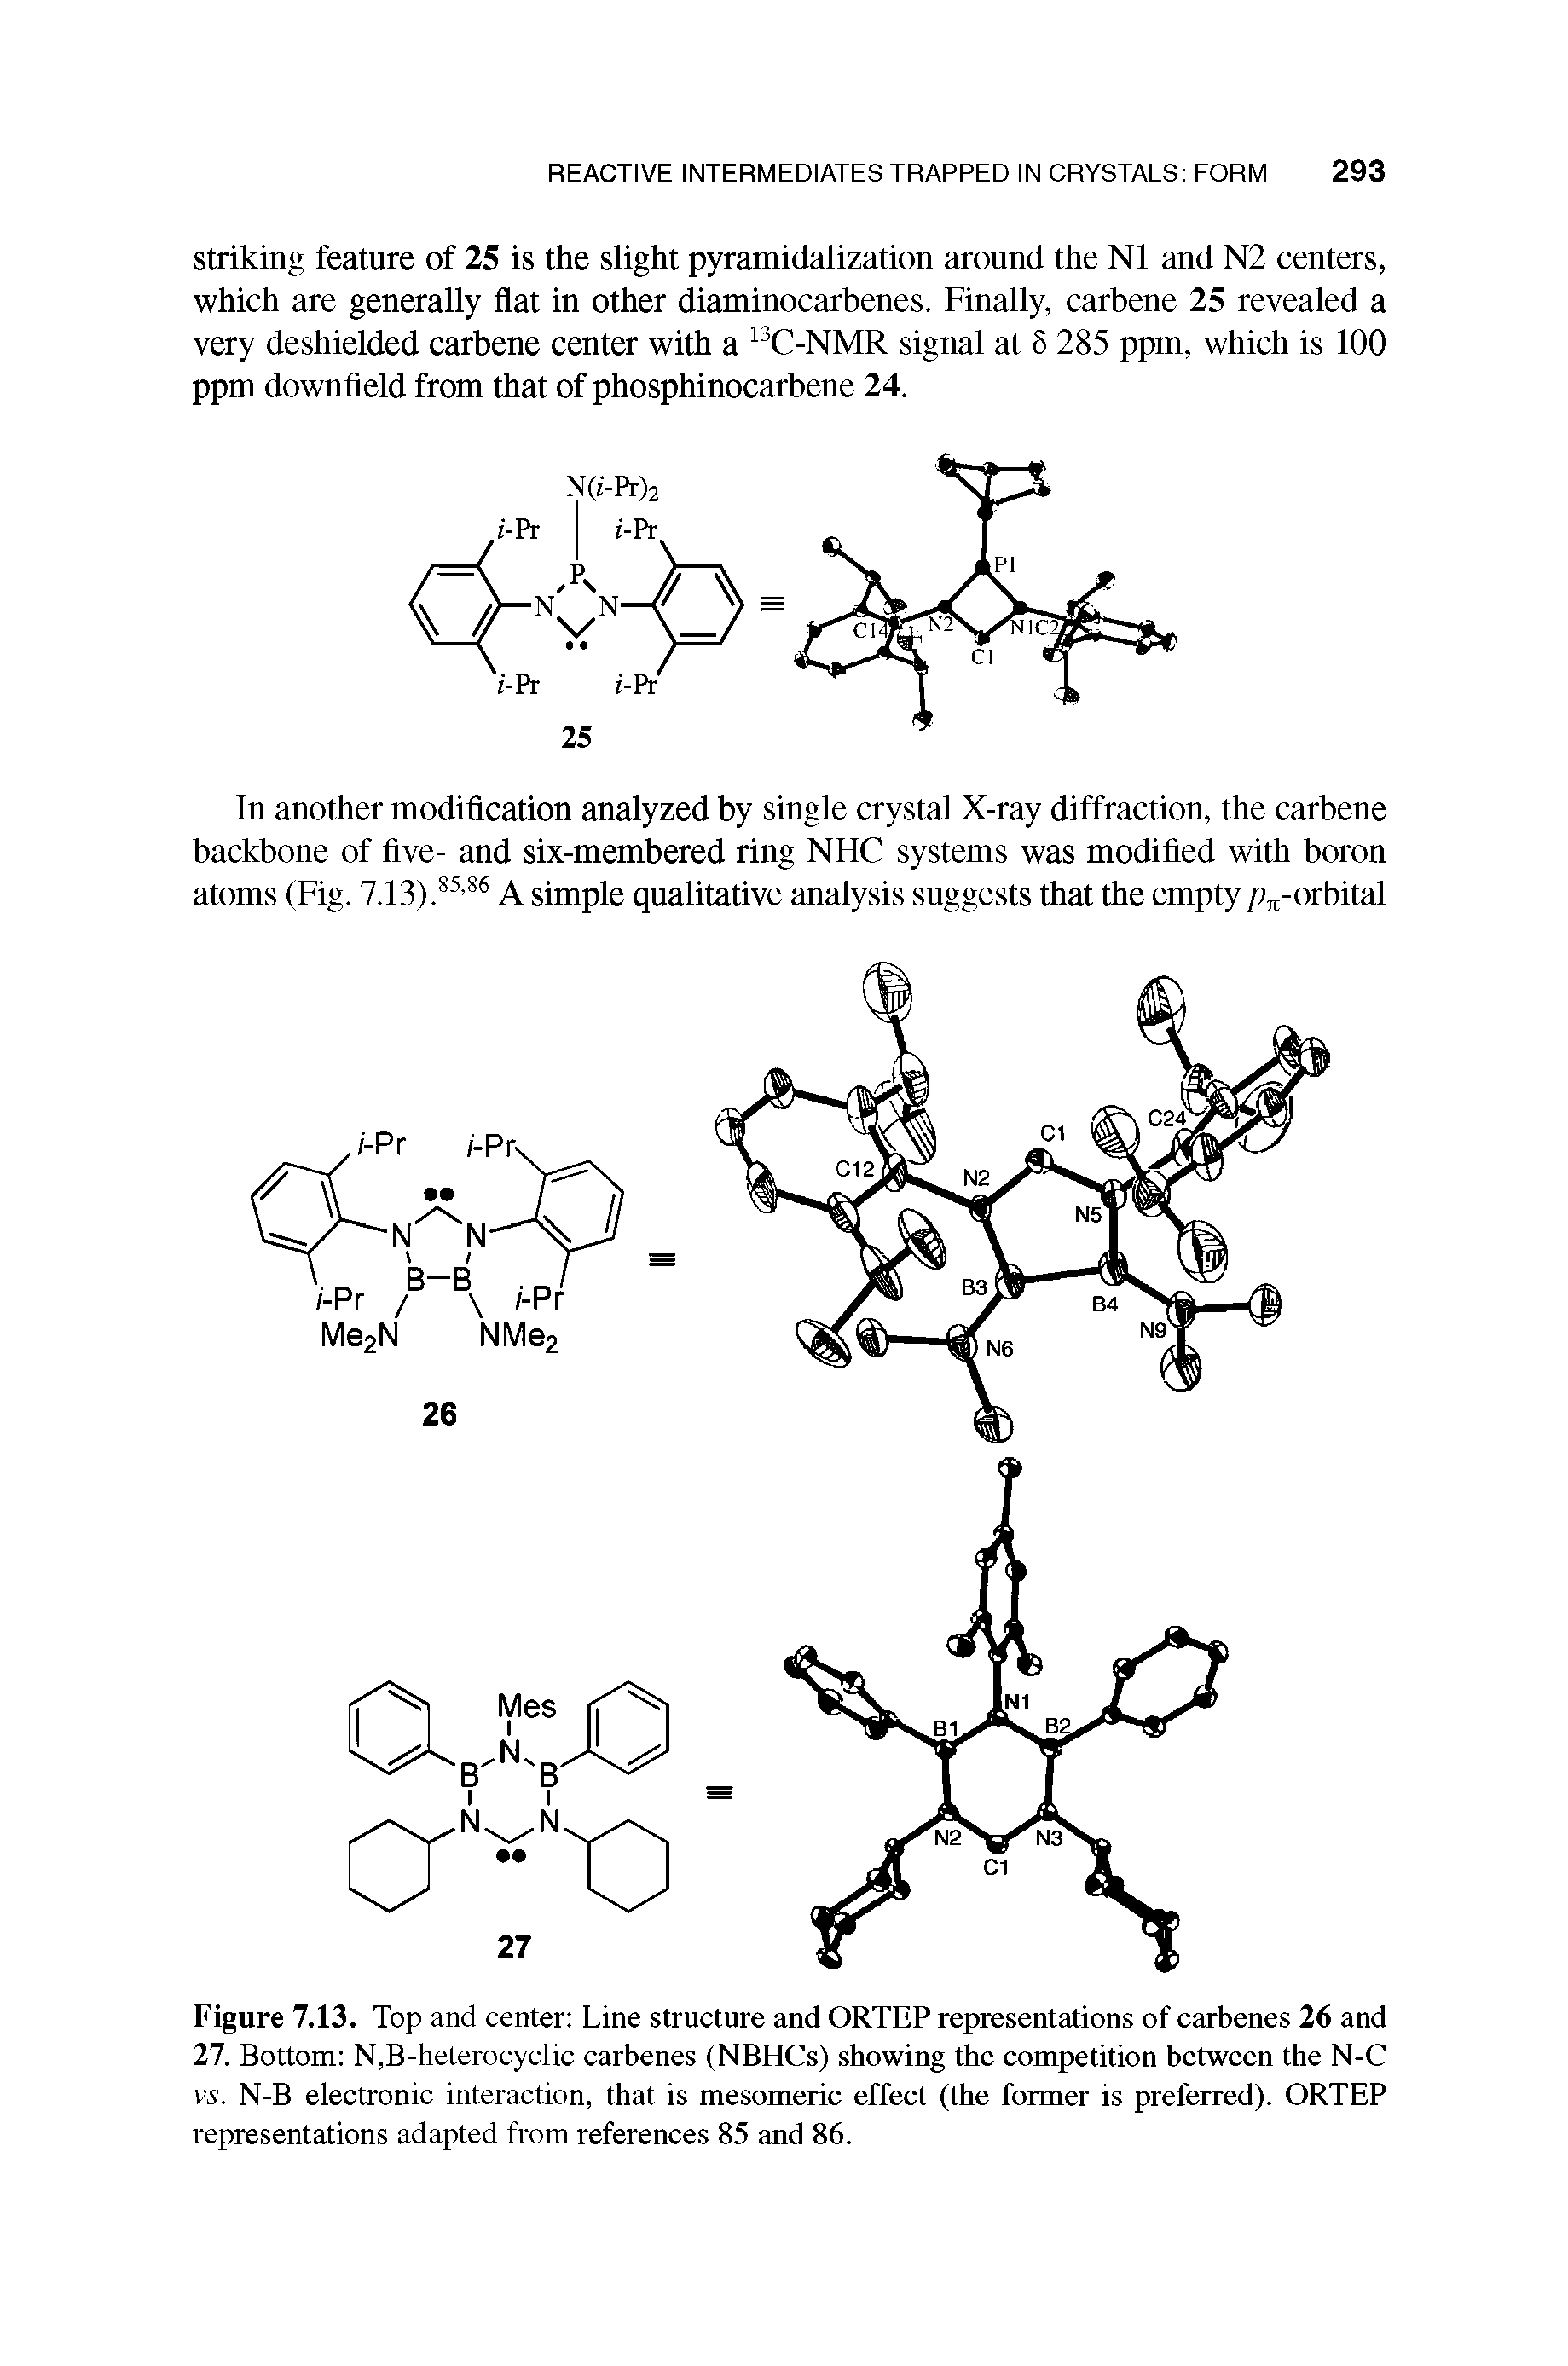 Figure 7.13. Top and center Line structure and ORTEP representations of carbenes 26 and 27. Bottom N,B-heterocyclic carbenes (NBHCs) showing the competition between the N-C Vi. N-B electronic interaction, that is mesomeric effect (the former is preferred). ORTEP representations adapted from references 85 and 86.